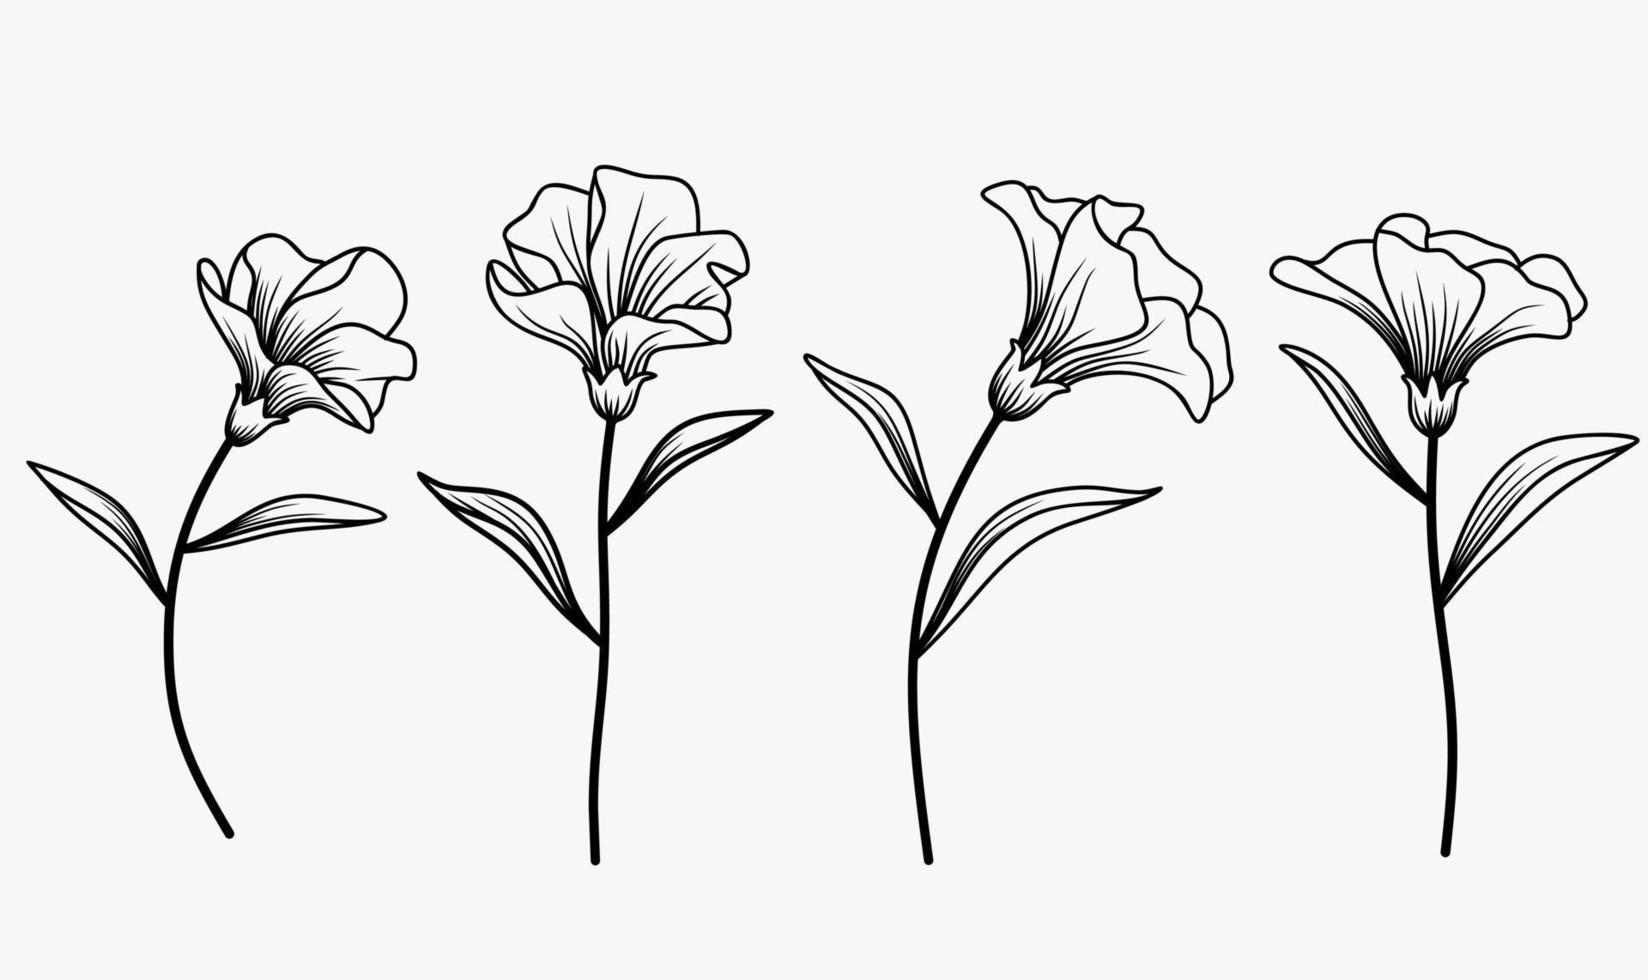 Vector set of one line drawing abstract flowers. Hand drawn modern minimalistic design for creative logo, icon or emblem